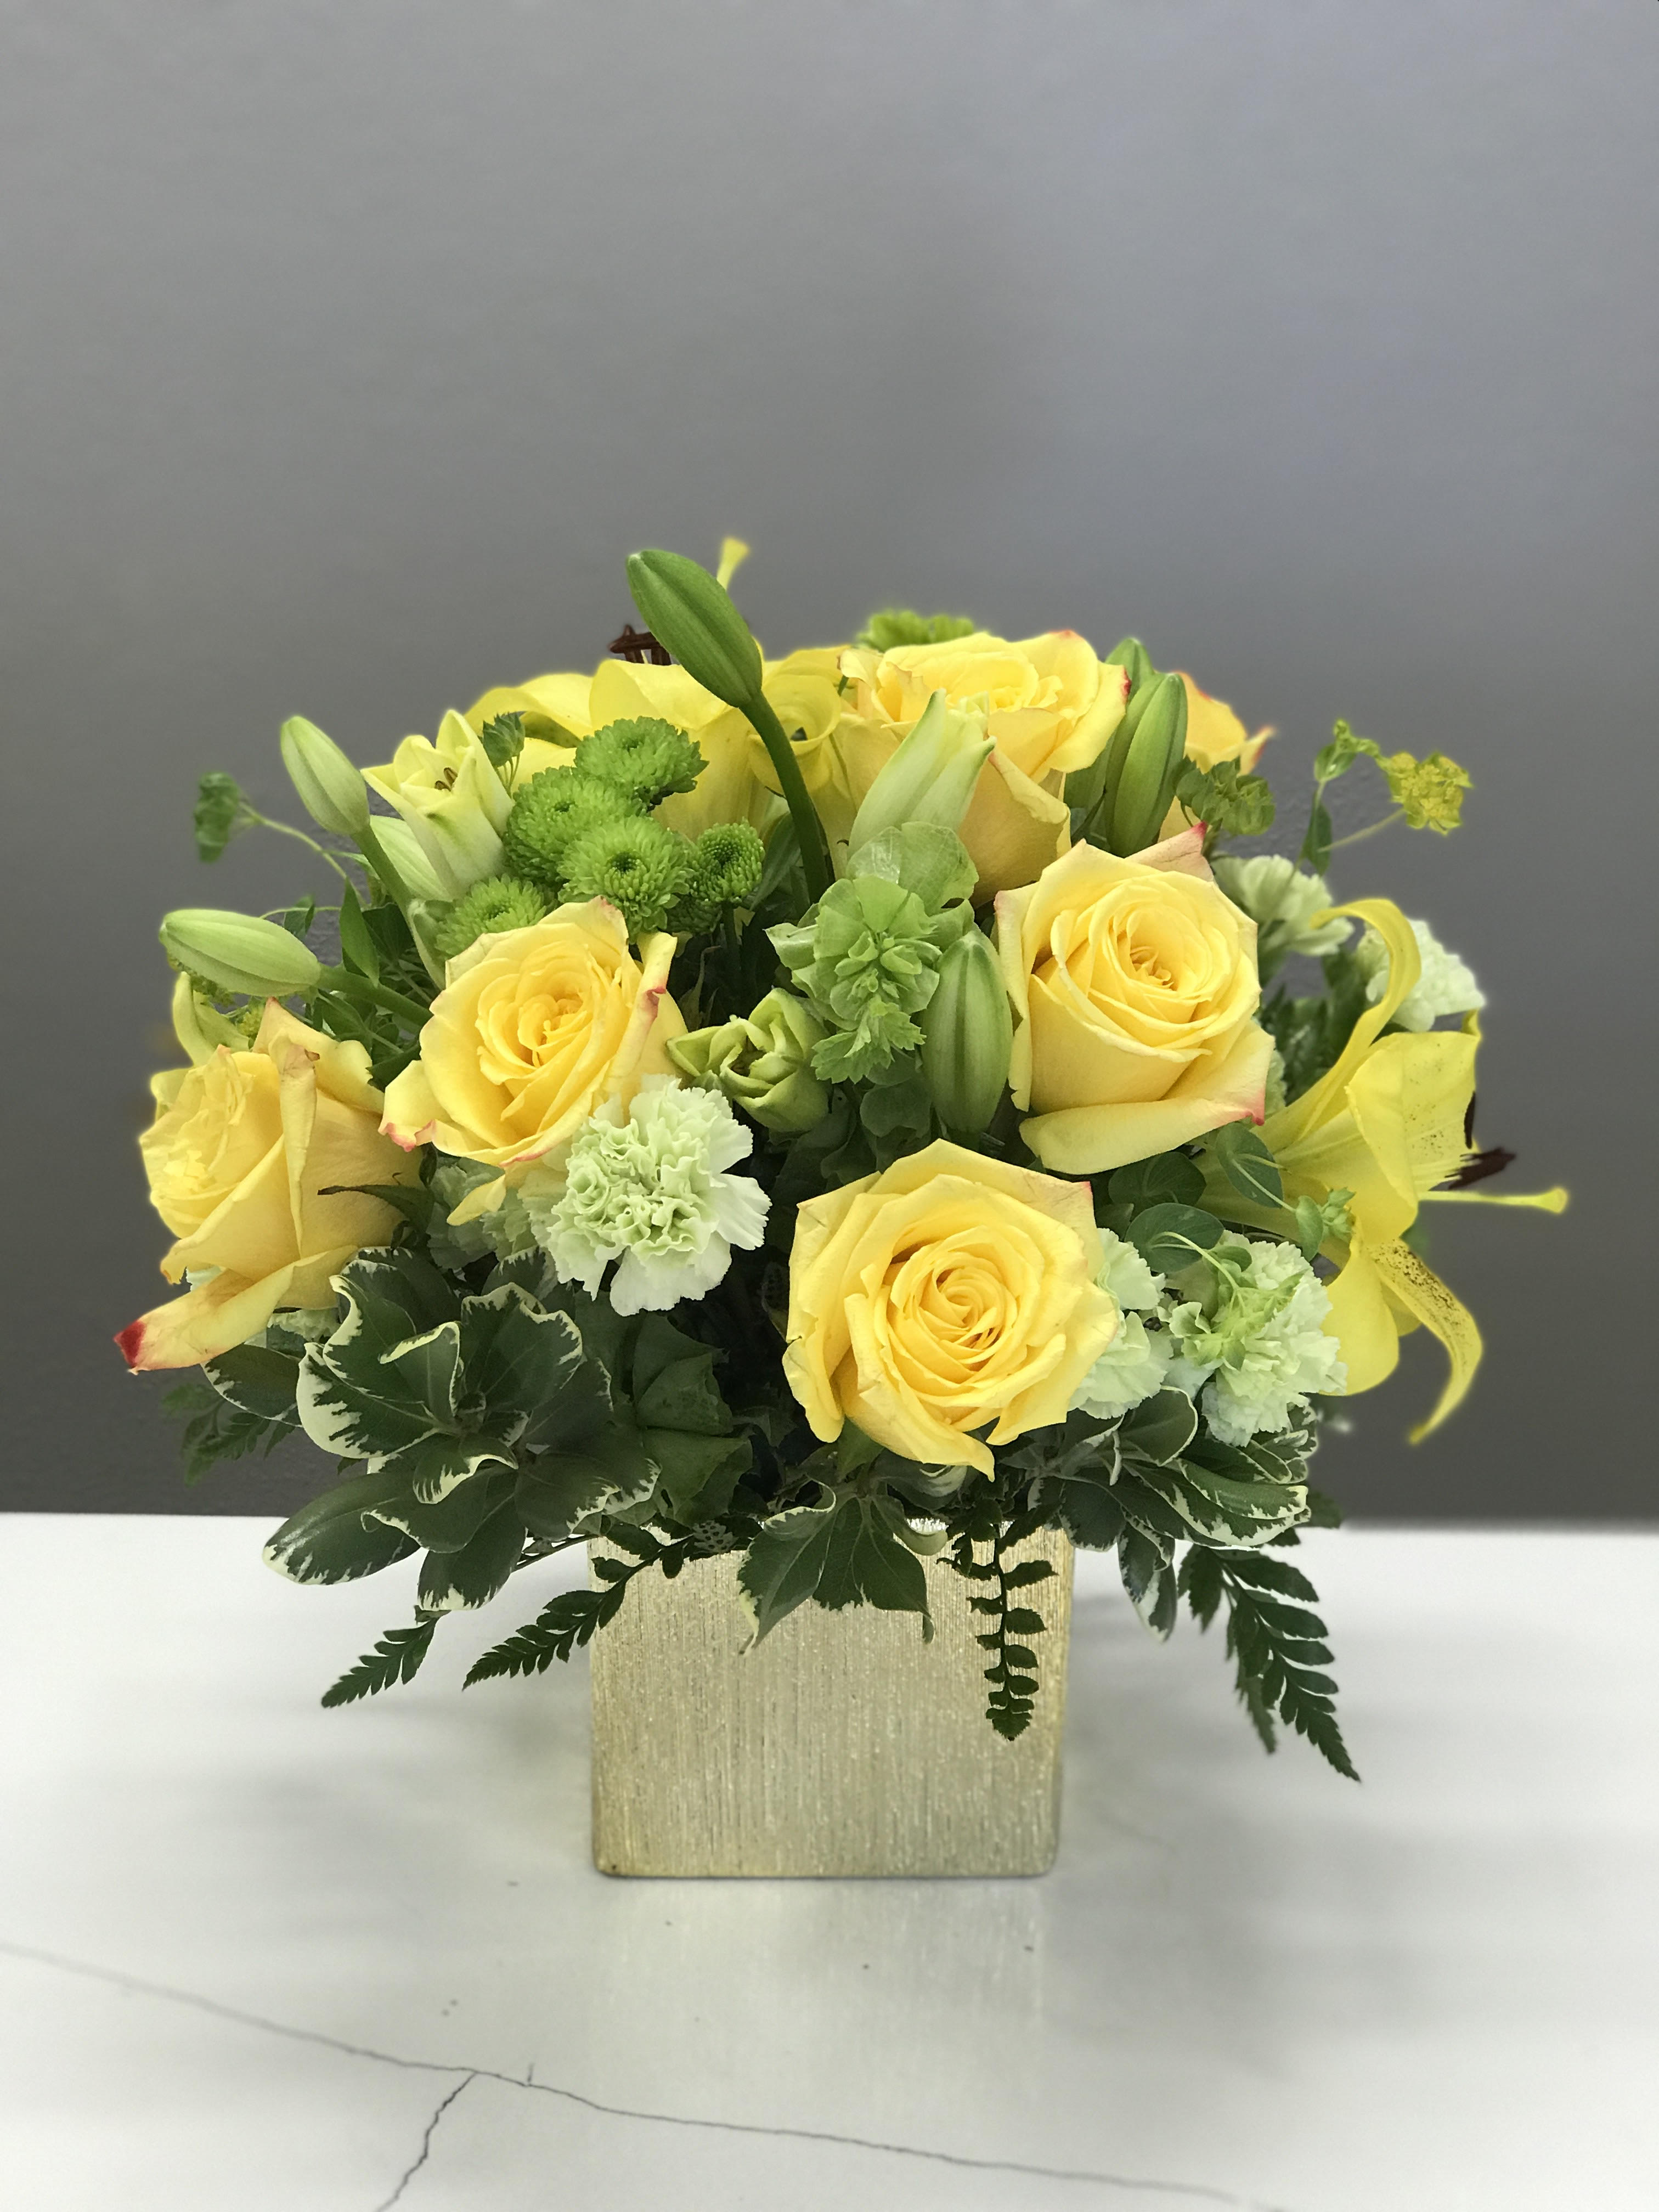 Chartreuse Charisma  - Green and yellow dancing together to brighten the day of friends or family in this elegant and light-hearted arrangement. 